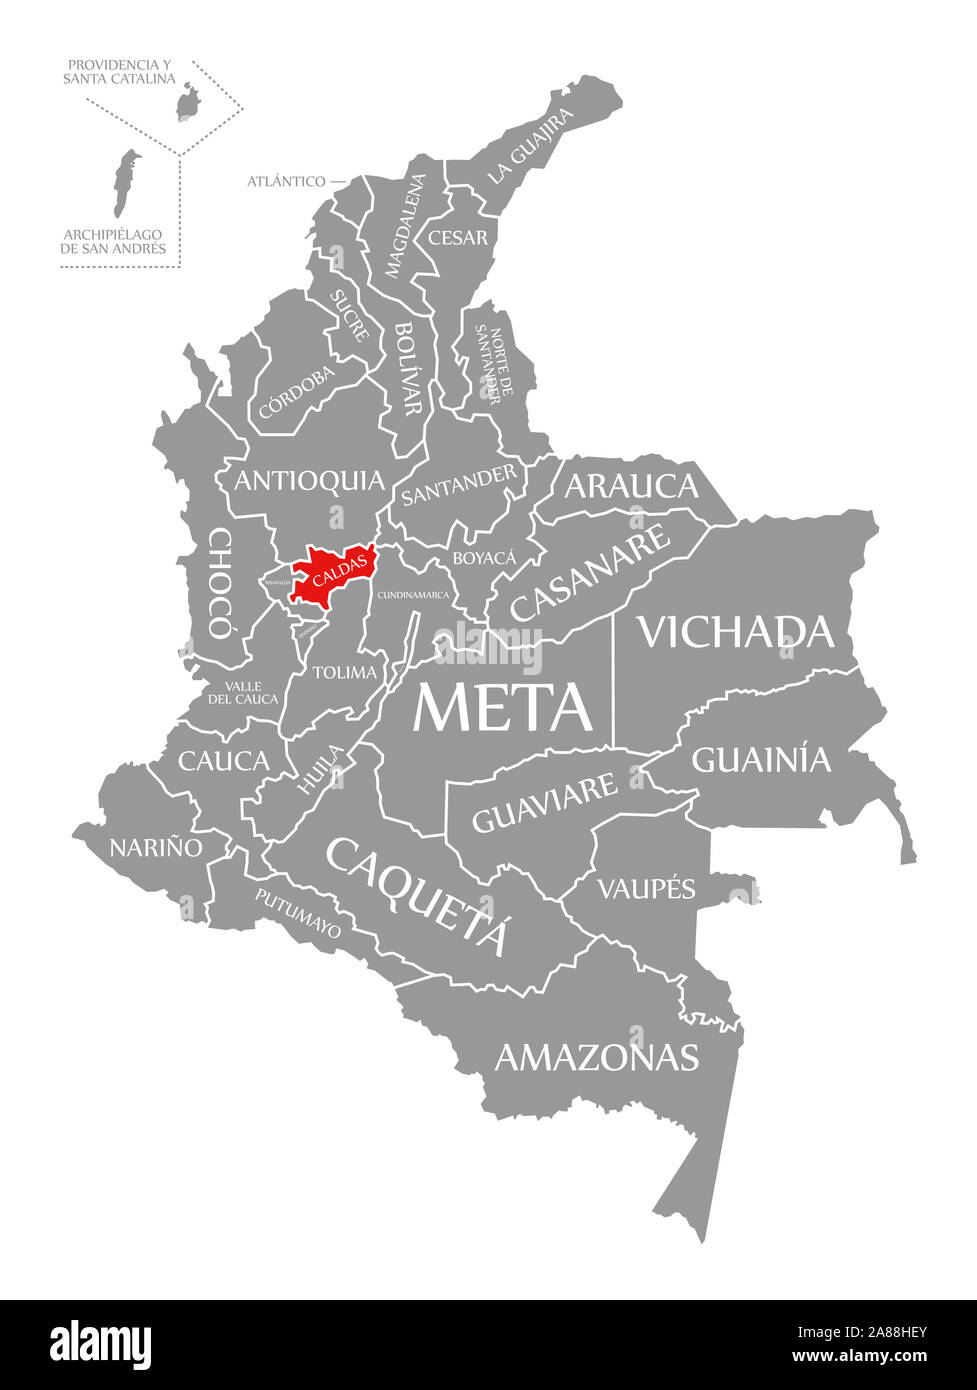 Caldas red highlighted in map of Colombia Stock Photo